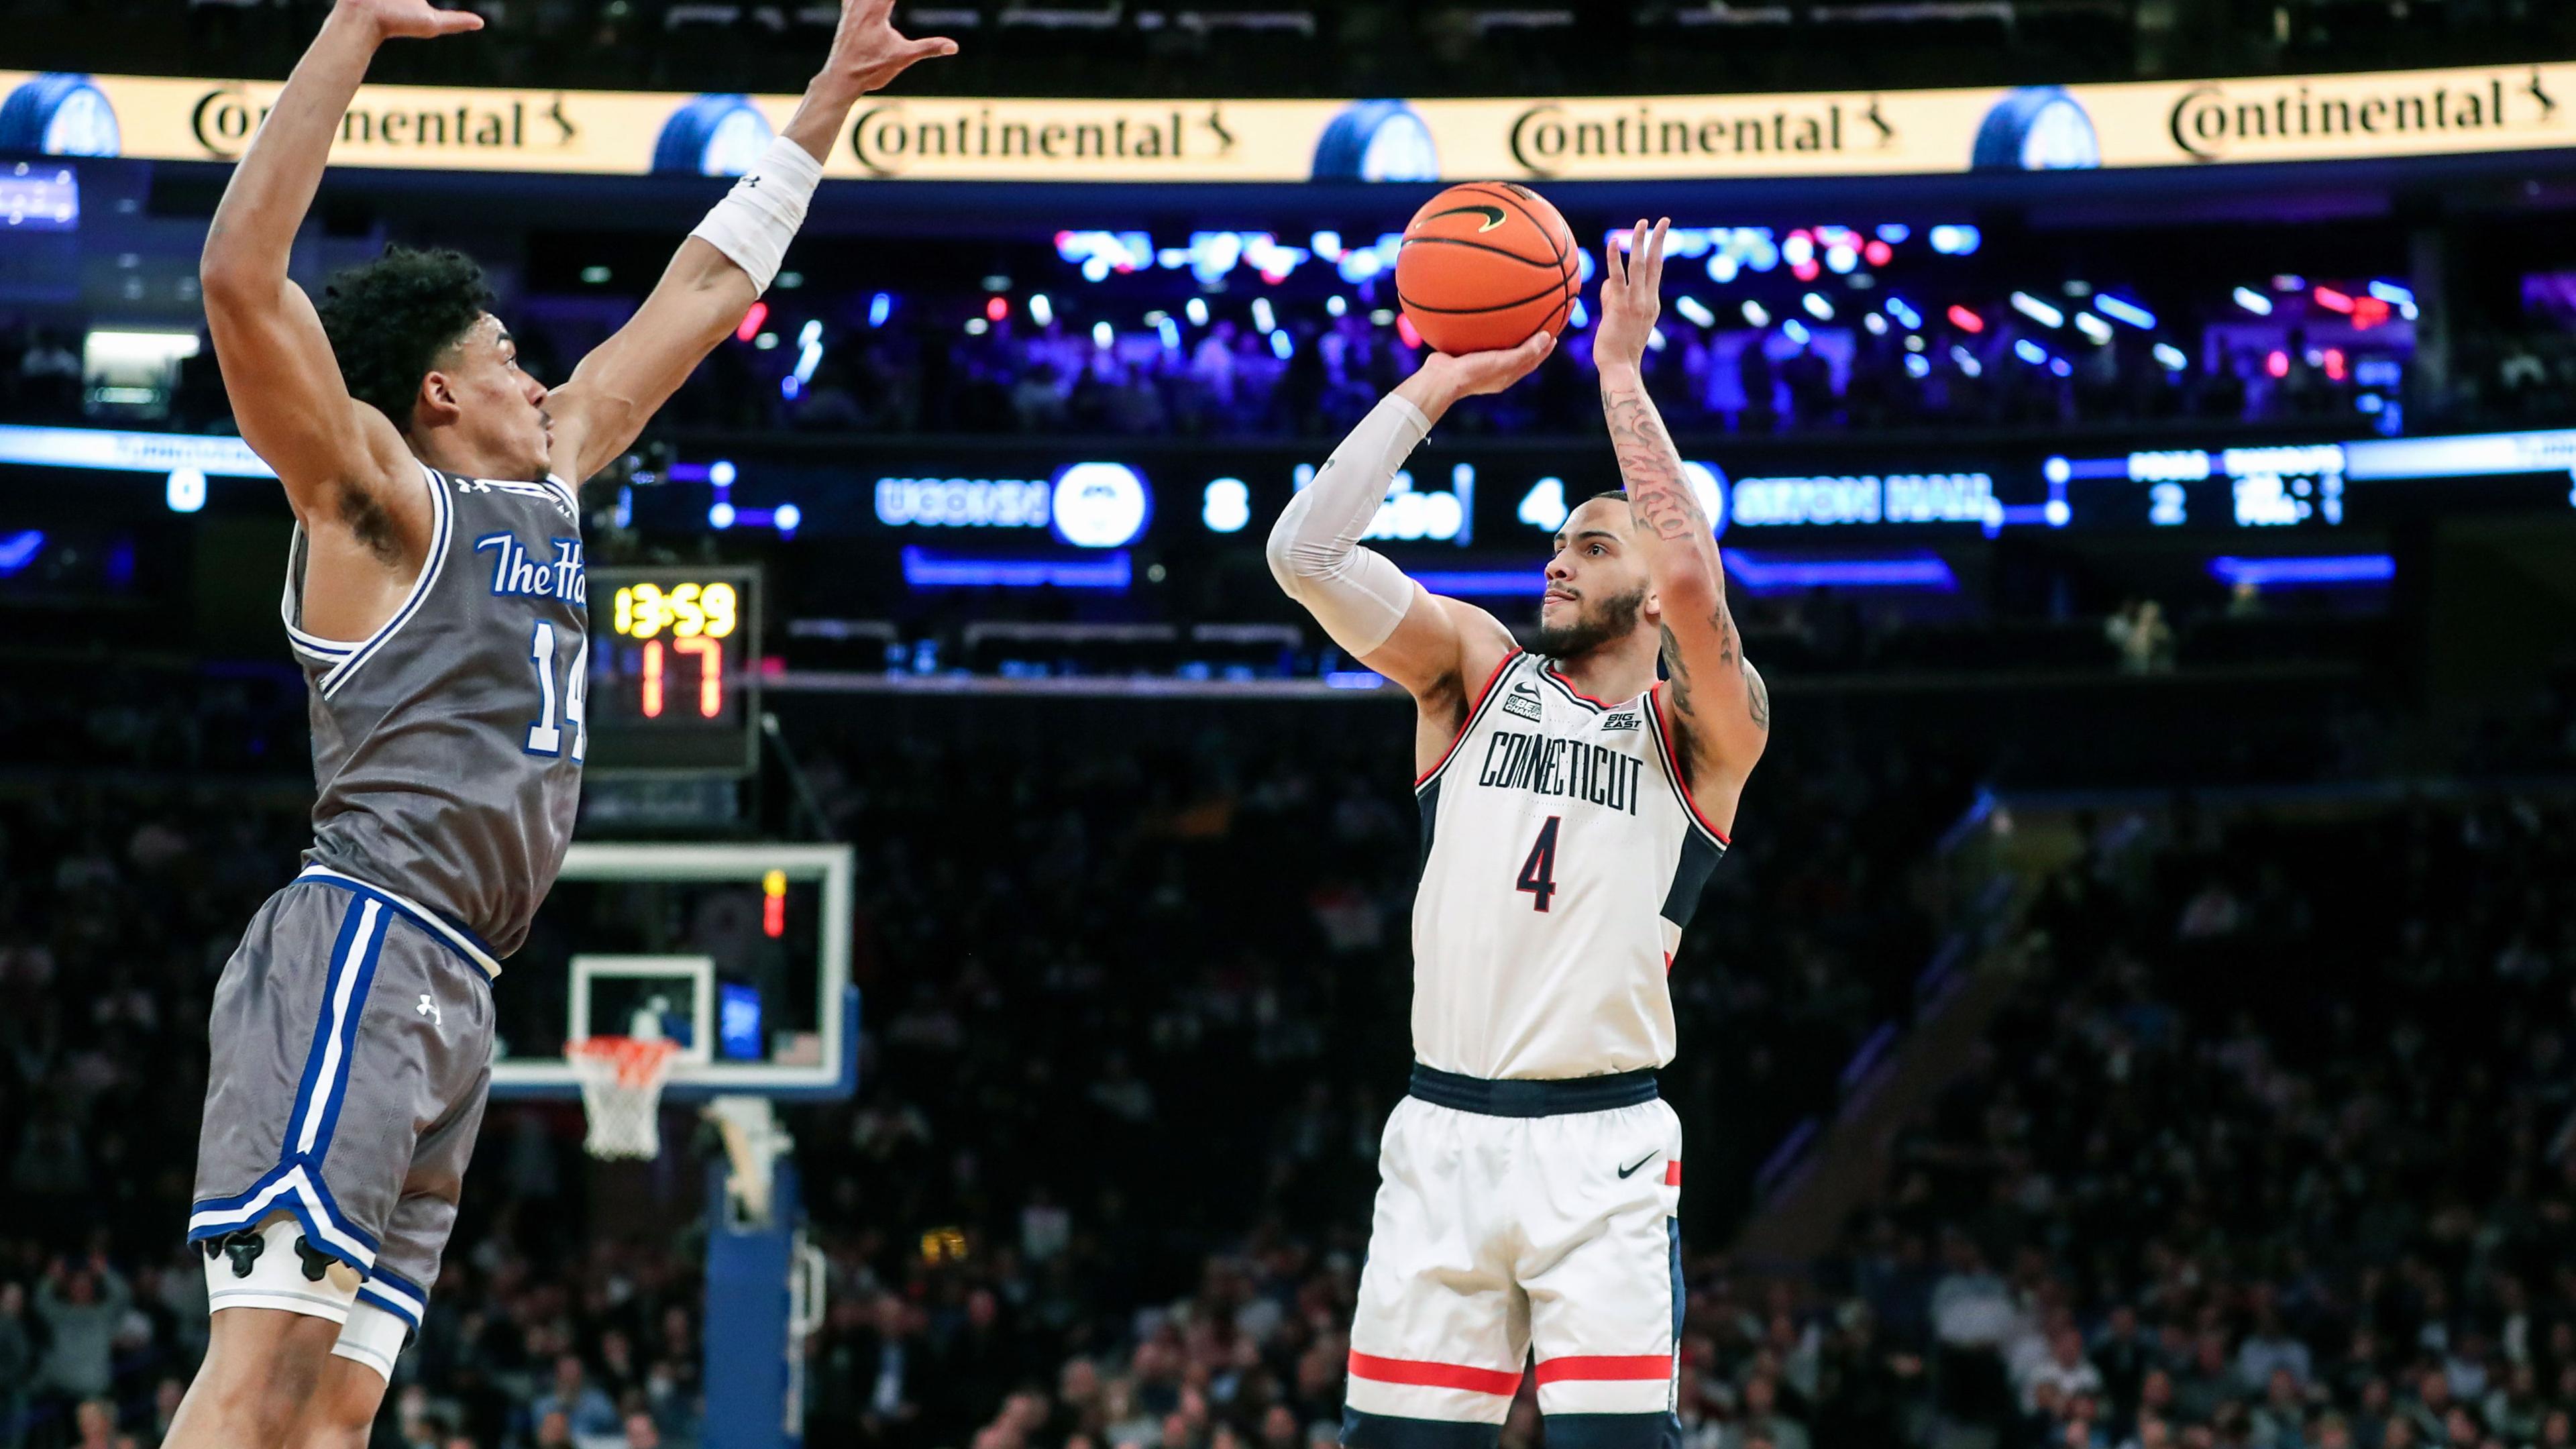 Mar 10, 2022; New York, NY, USA; Connecticut Huskies guard Tyrese Martin (4) shoots past Seton Hall Pirates guard Jared Rhoden (14) in the first half at the Big East Tournament at Madison Square Garden. / Wendell Cruz-USA TODAY Sports